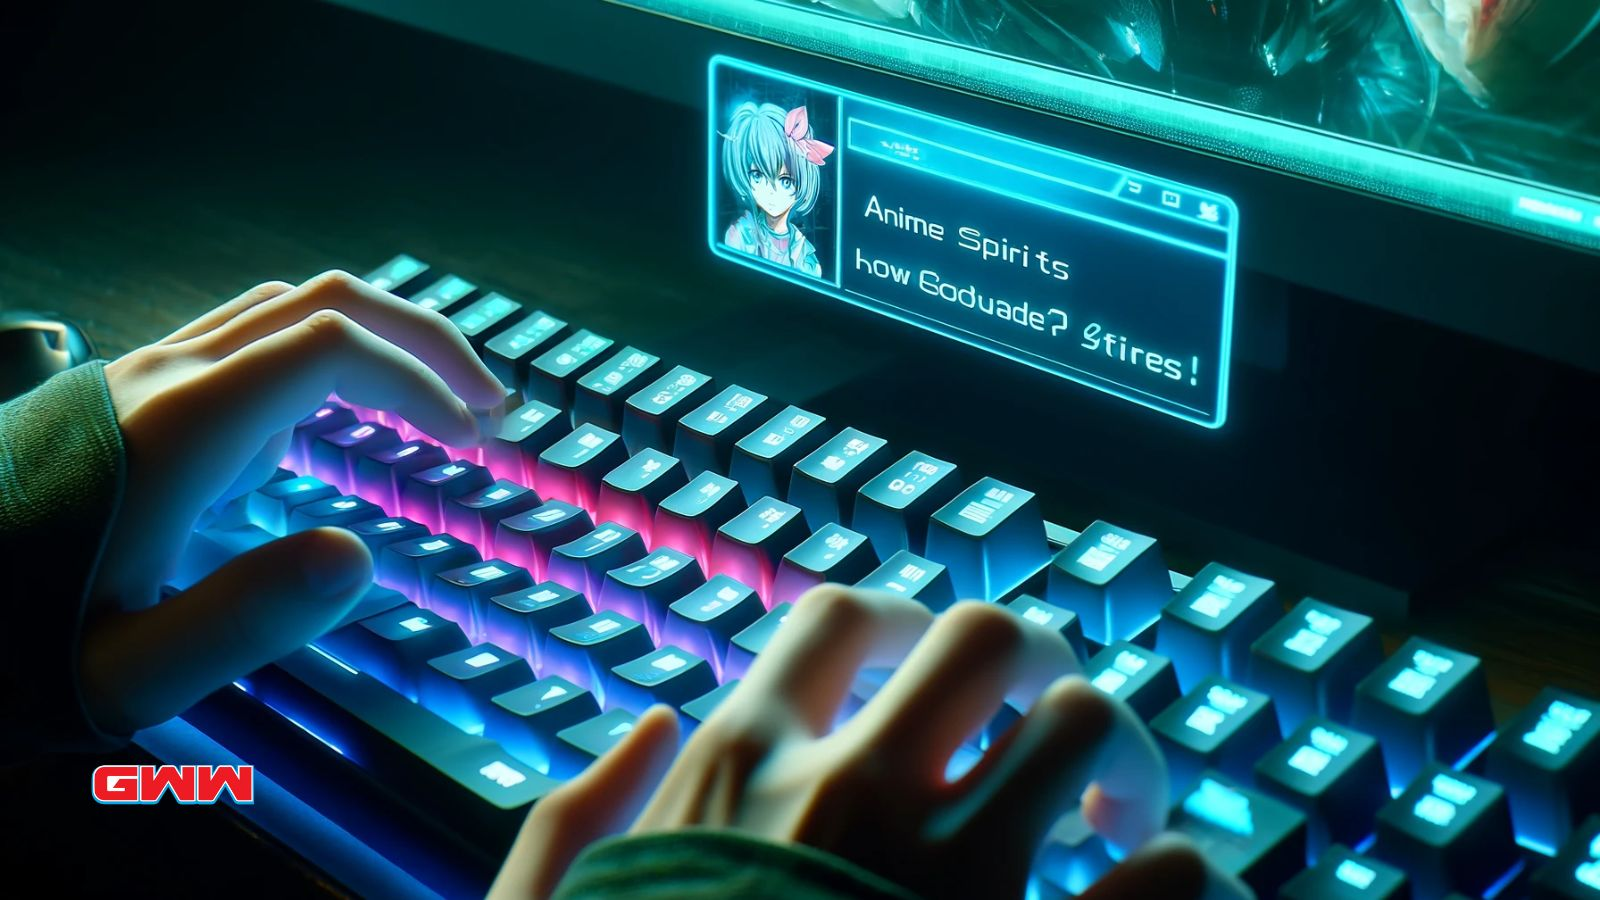 Hands typing on a futuristic keyboard, inputting anime spirits codes